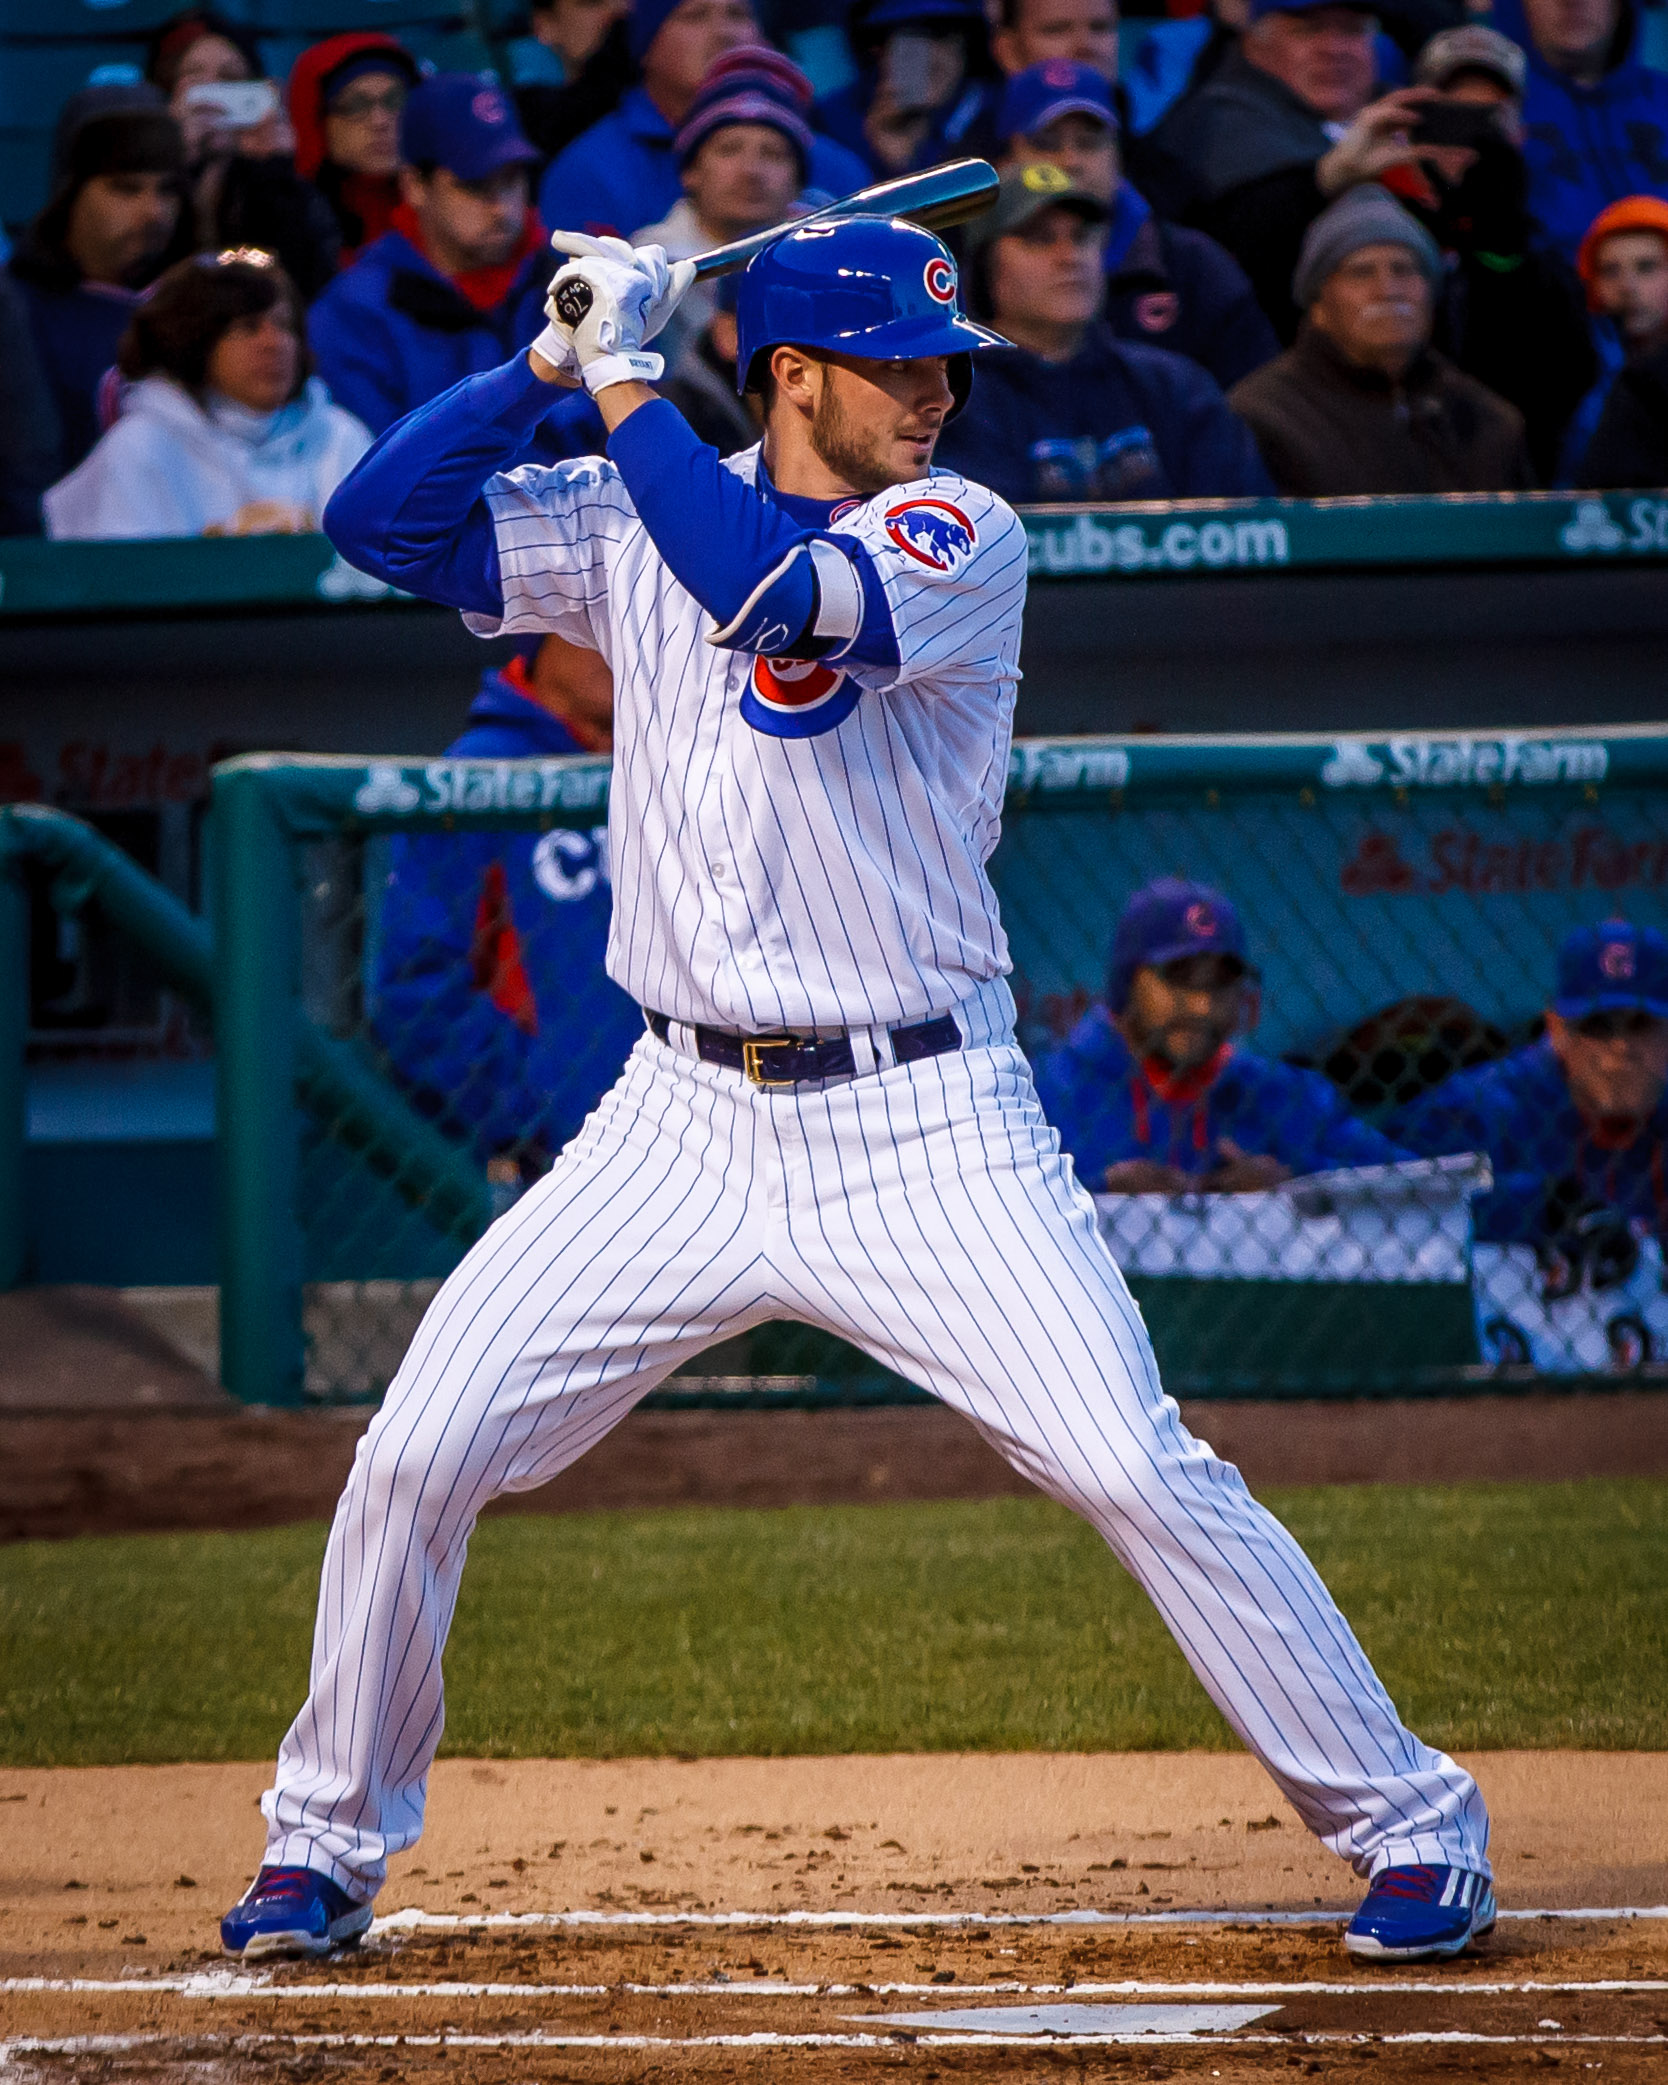 mlb wallpapers on X: kris bryant chicago cubs #7